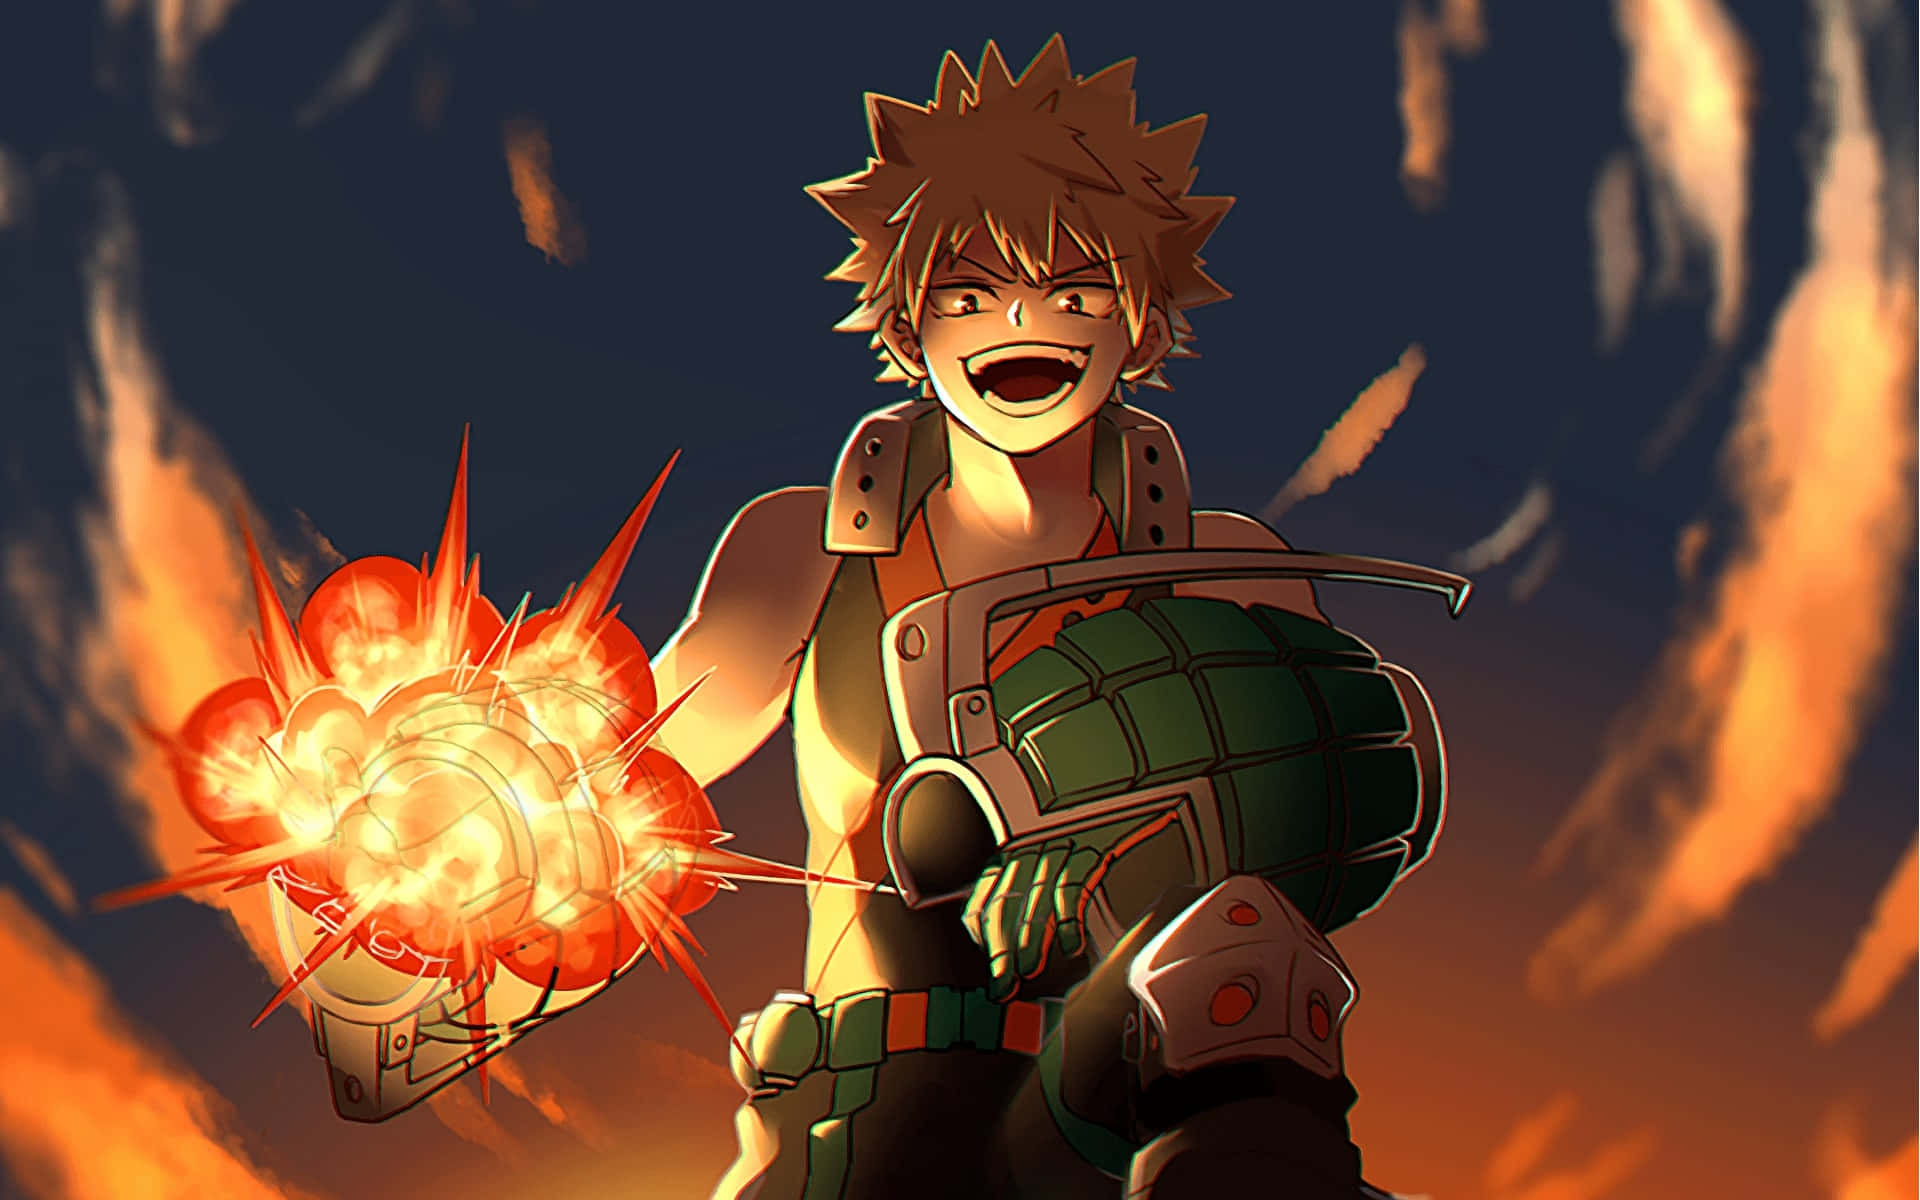 Show Off Your Love for Bakugou with a Aesthetic Desktop Background Wallpaper